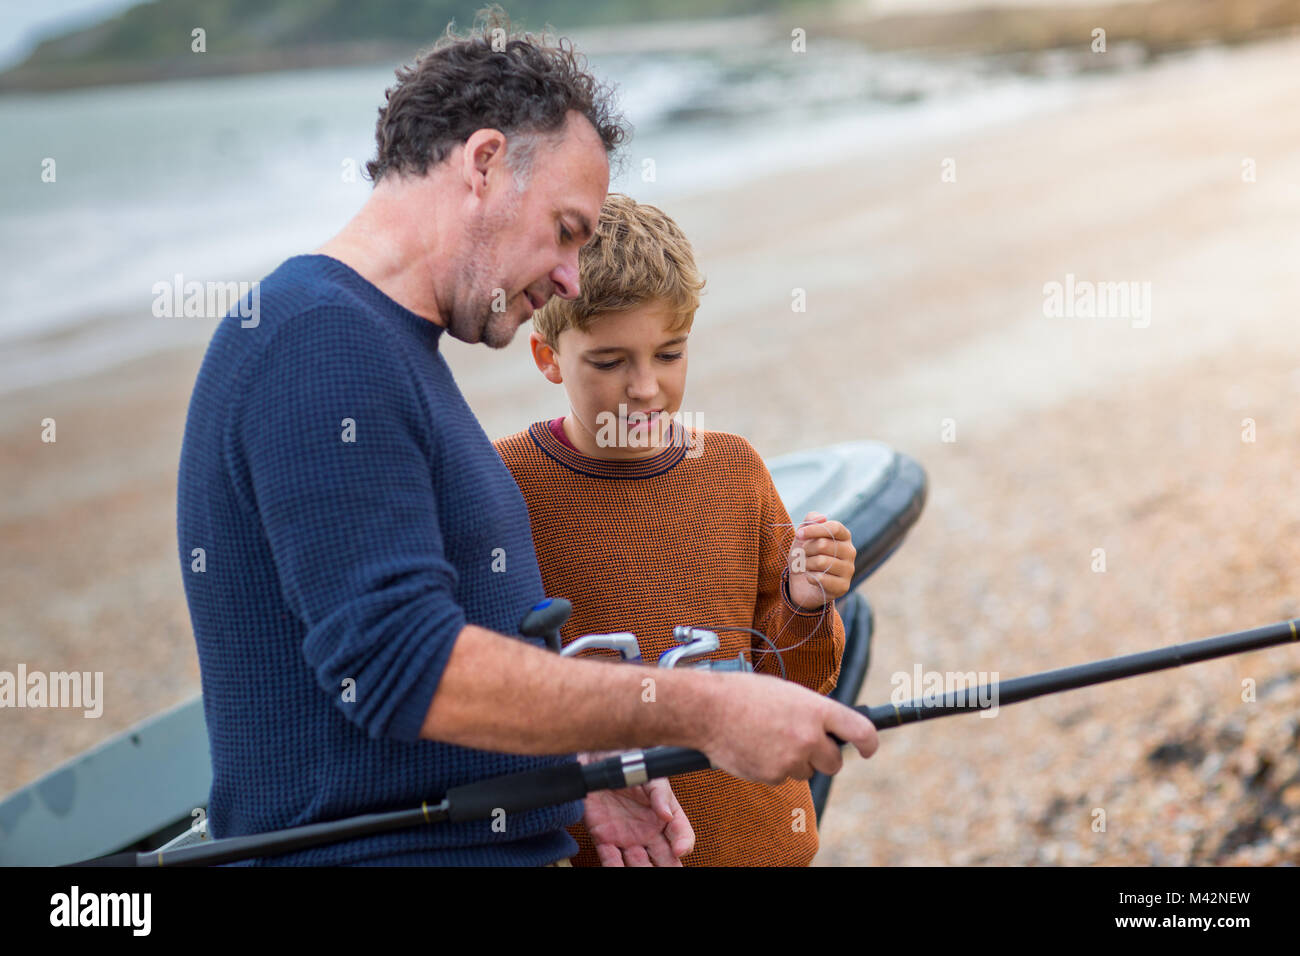 Father and Son setting up a fishing rod together Stock Photo